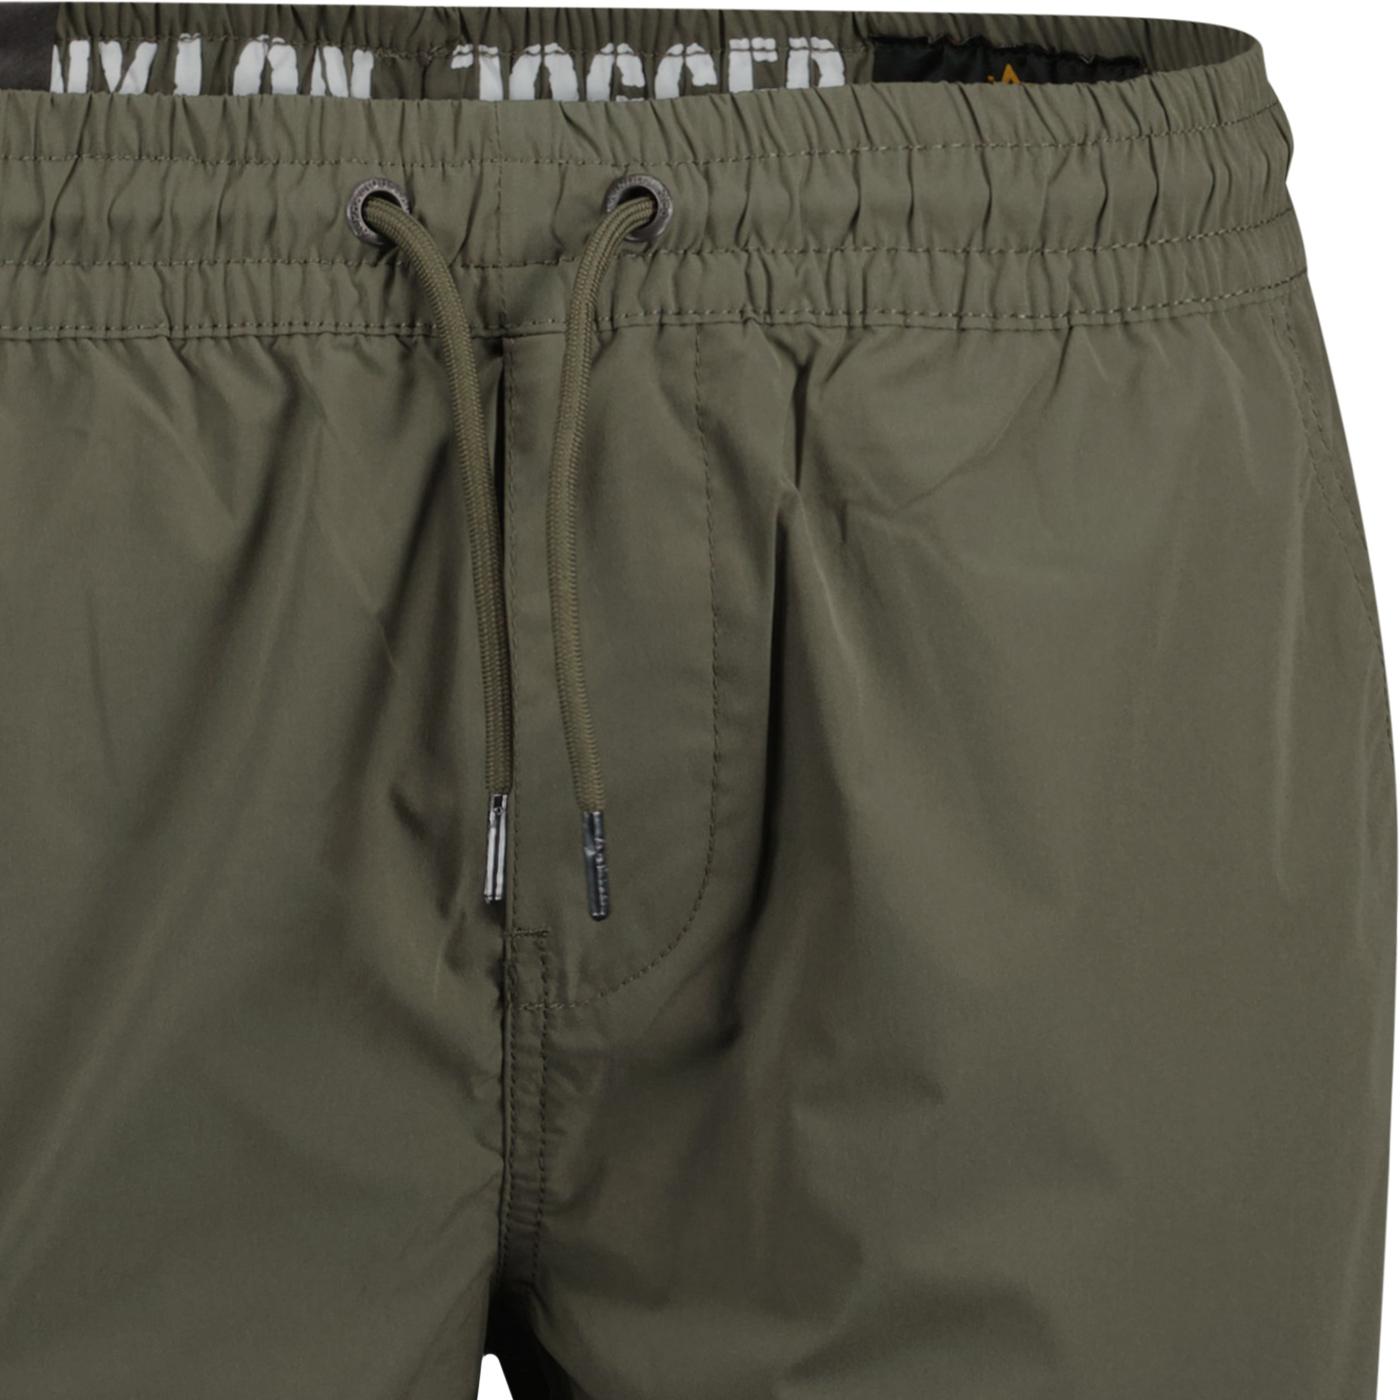 Joggers Dark Cargo INDUSTRIES Olive in Nylon Military ALPHA